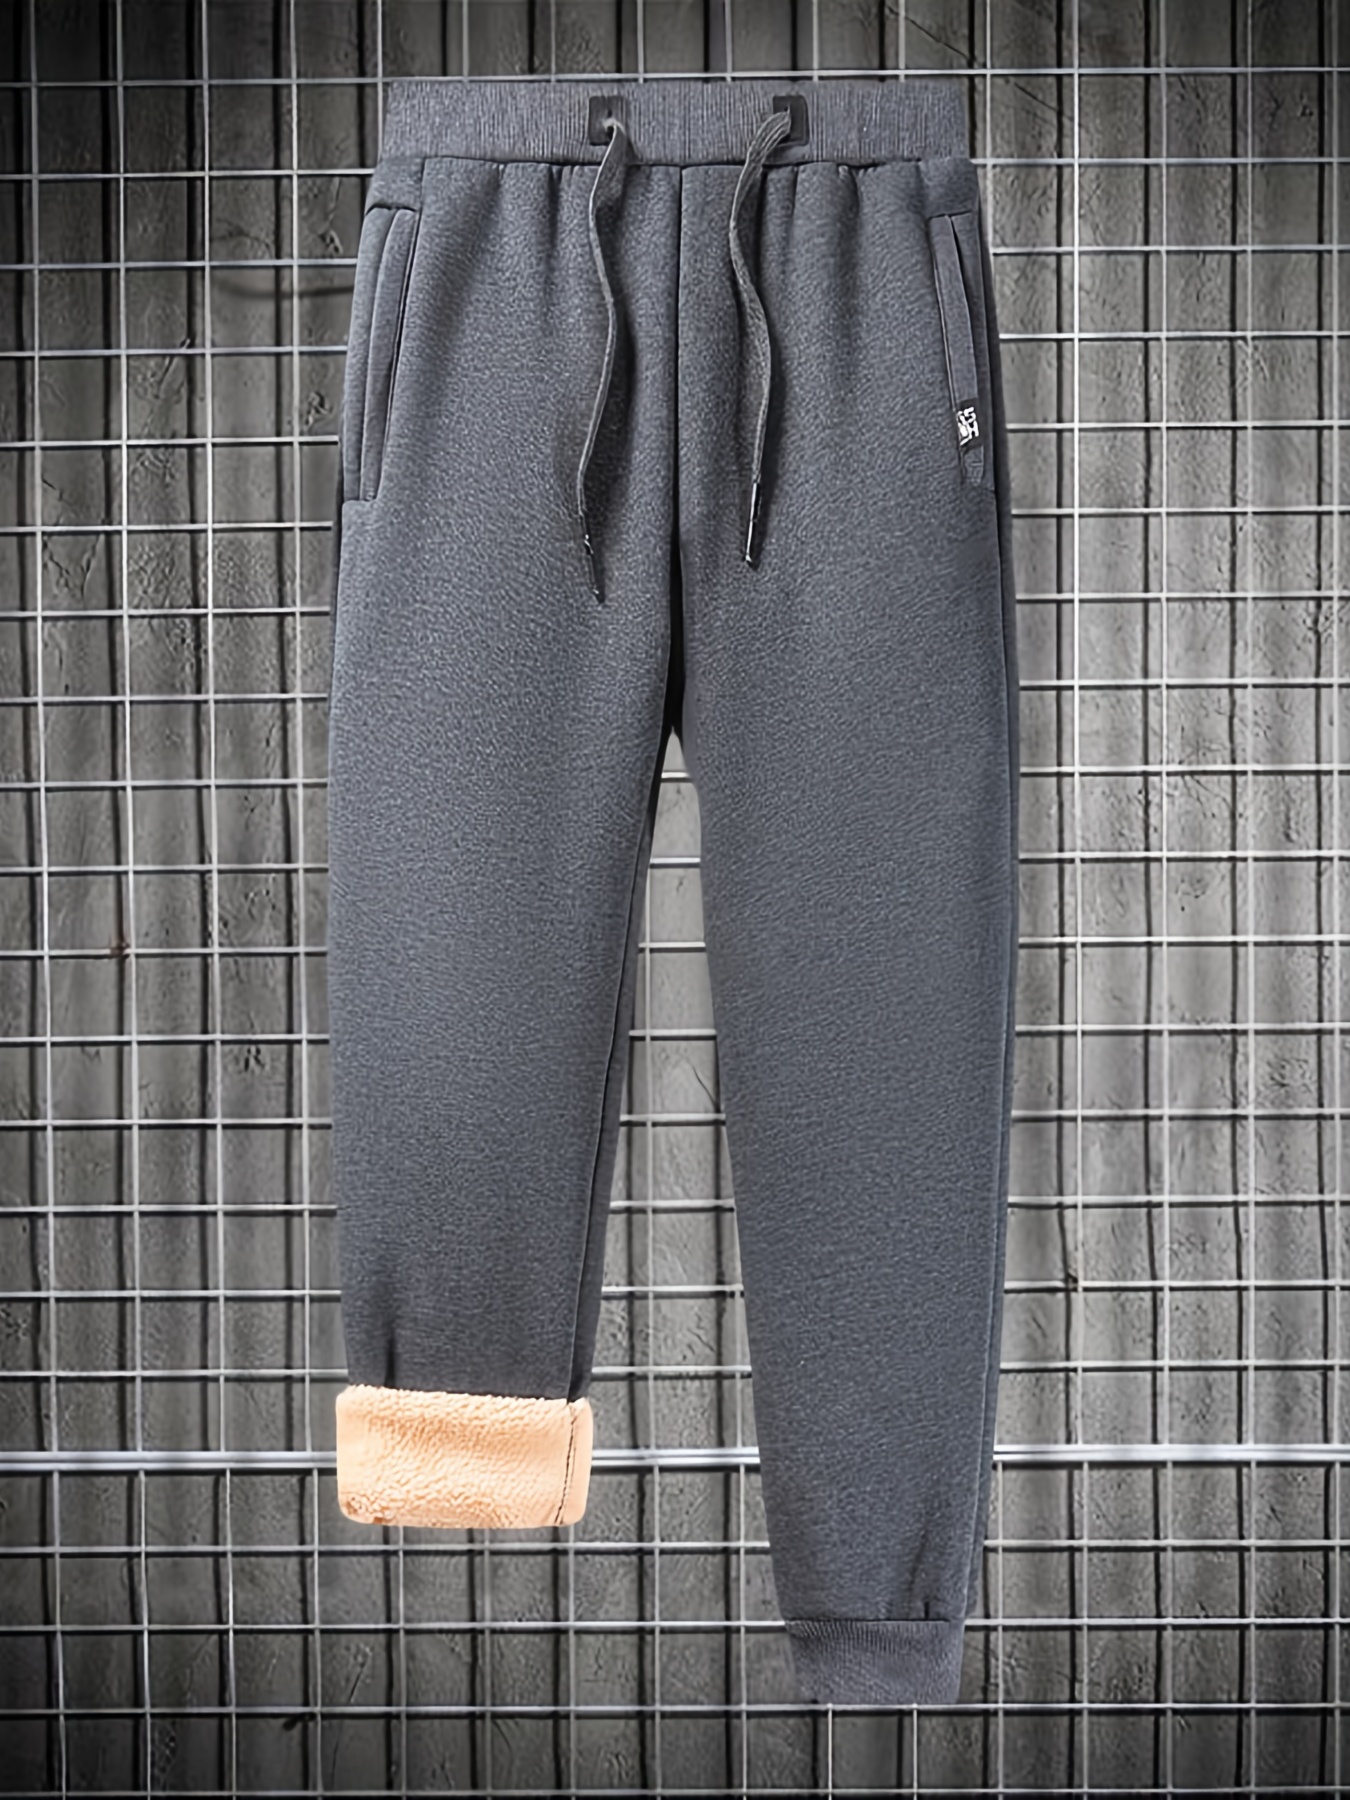 Warm Fleece Casual Pants, Men's Thick Sweatpants With Zipper Pockets For  Fall Winter